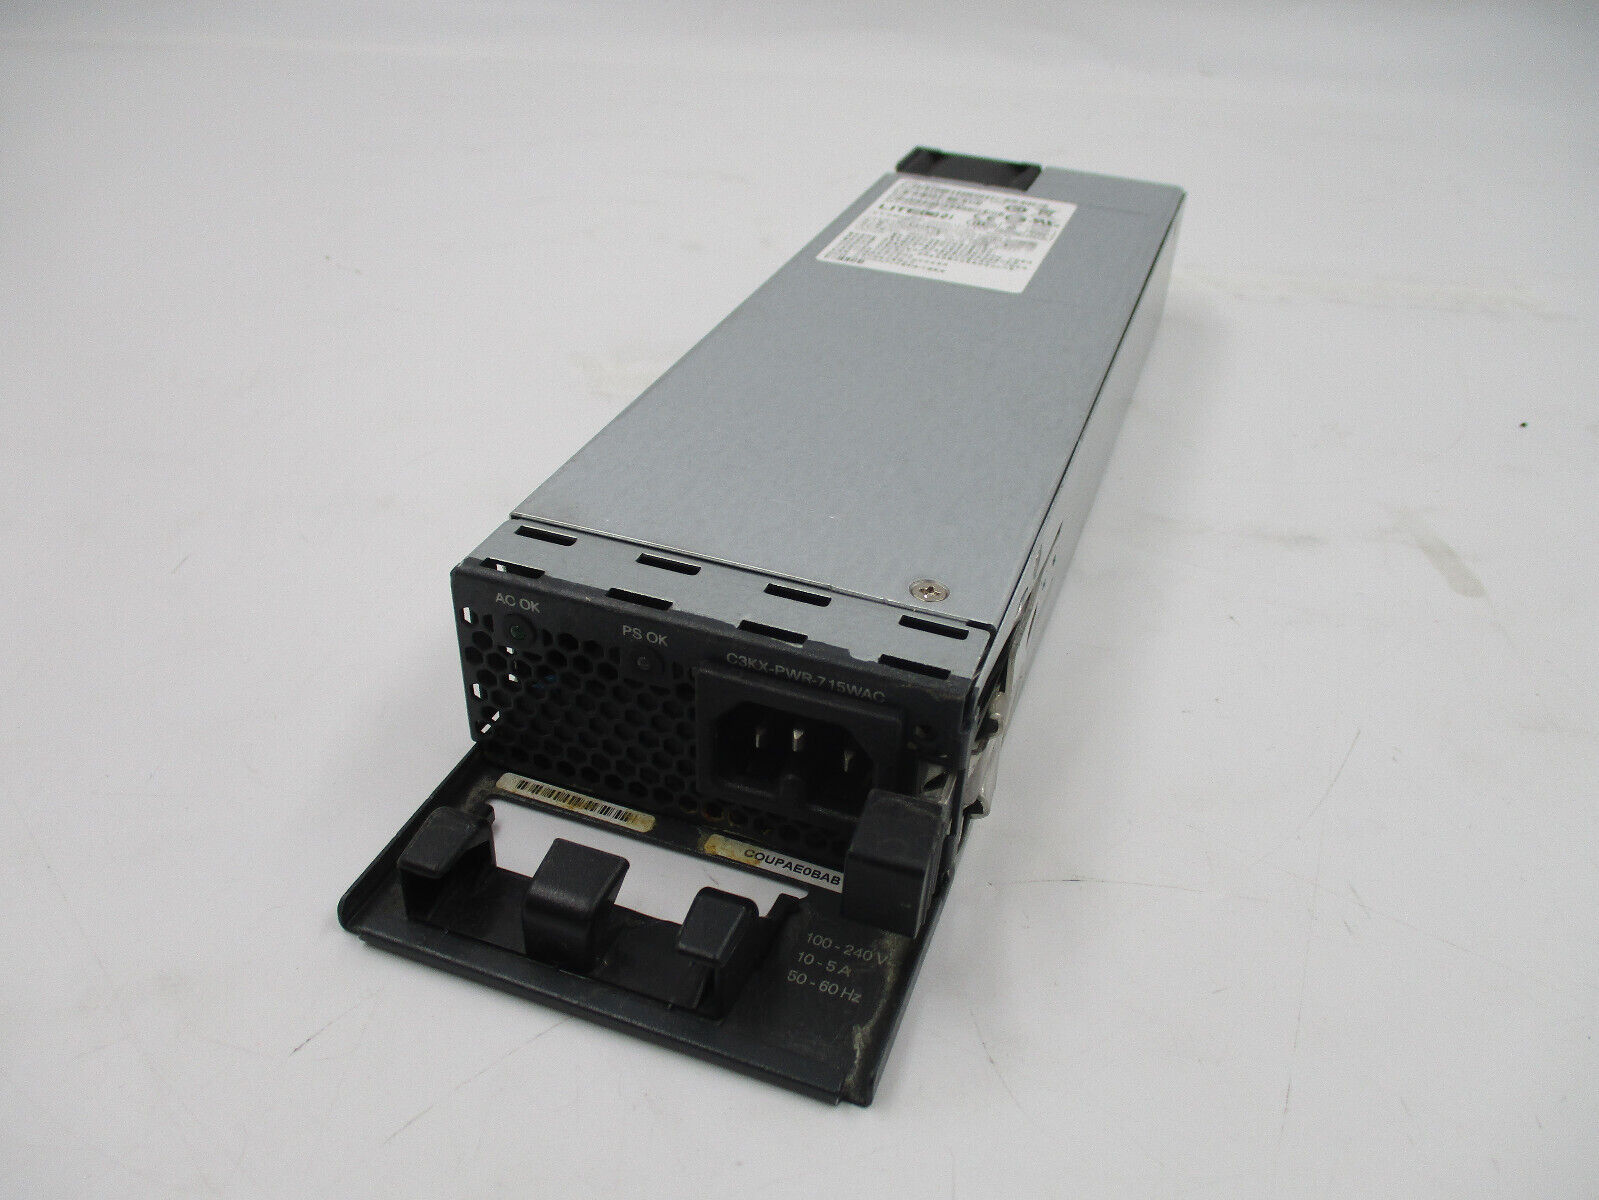 Lite-On PA-1711-1-LF 715W Switching Power Supply P/N: C3KX-PWR-715WAC Tested